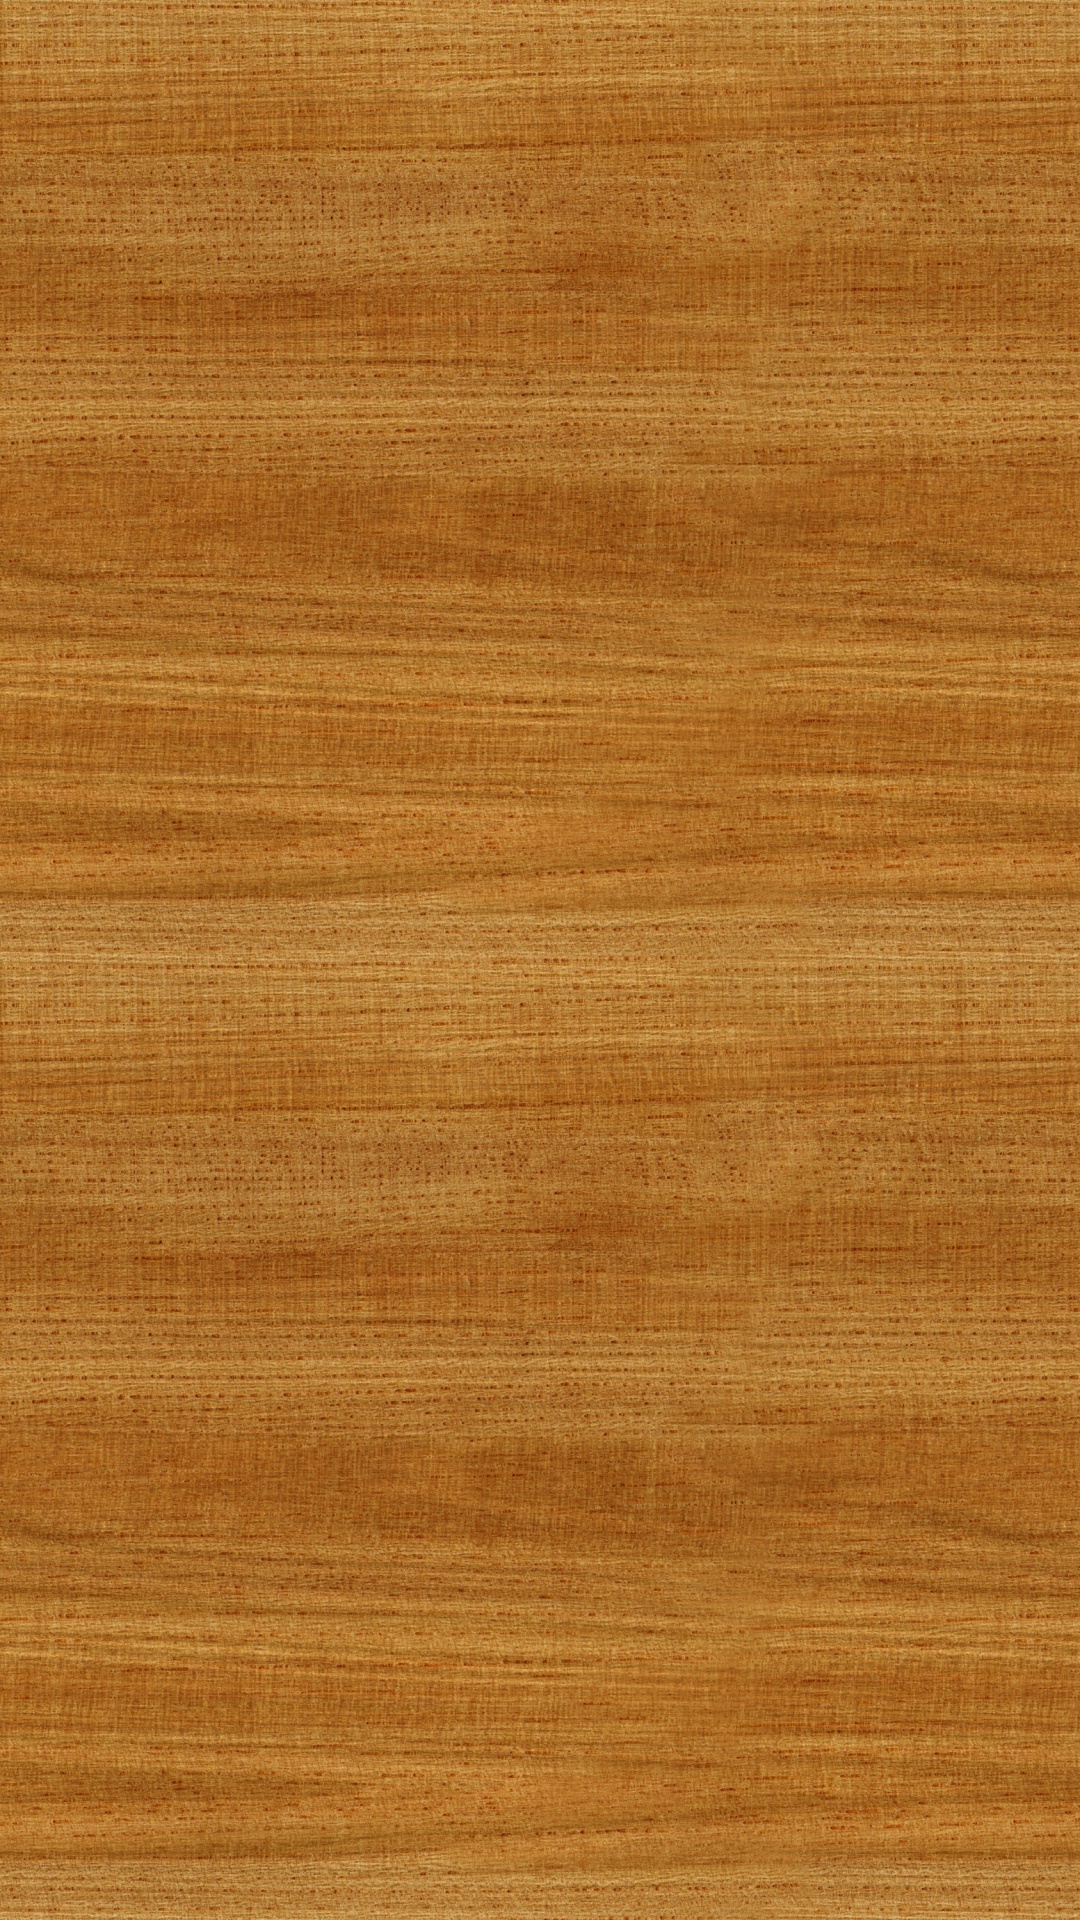 Brown Wooden Table With White Paper. Wallpaper in 1080x1920 Resolution